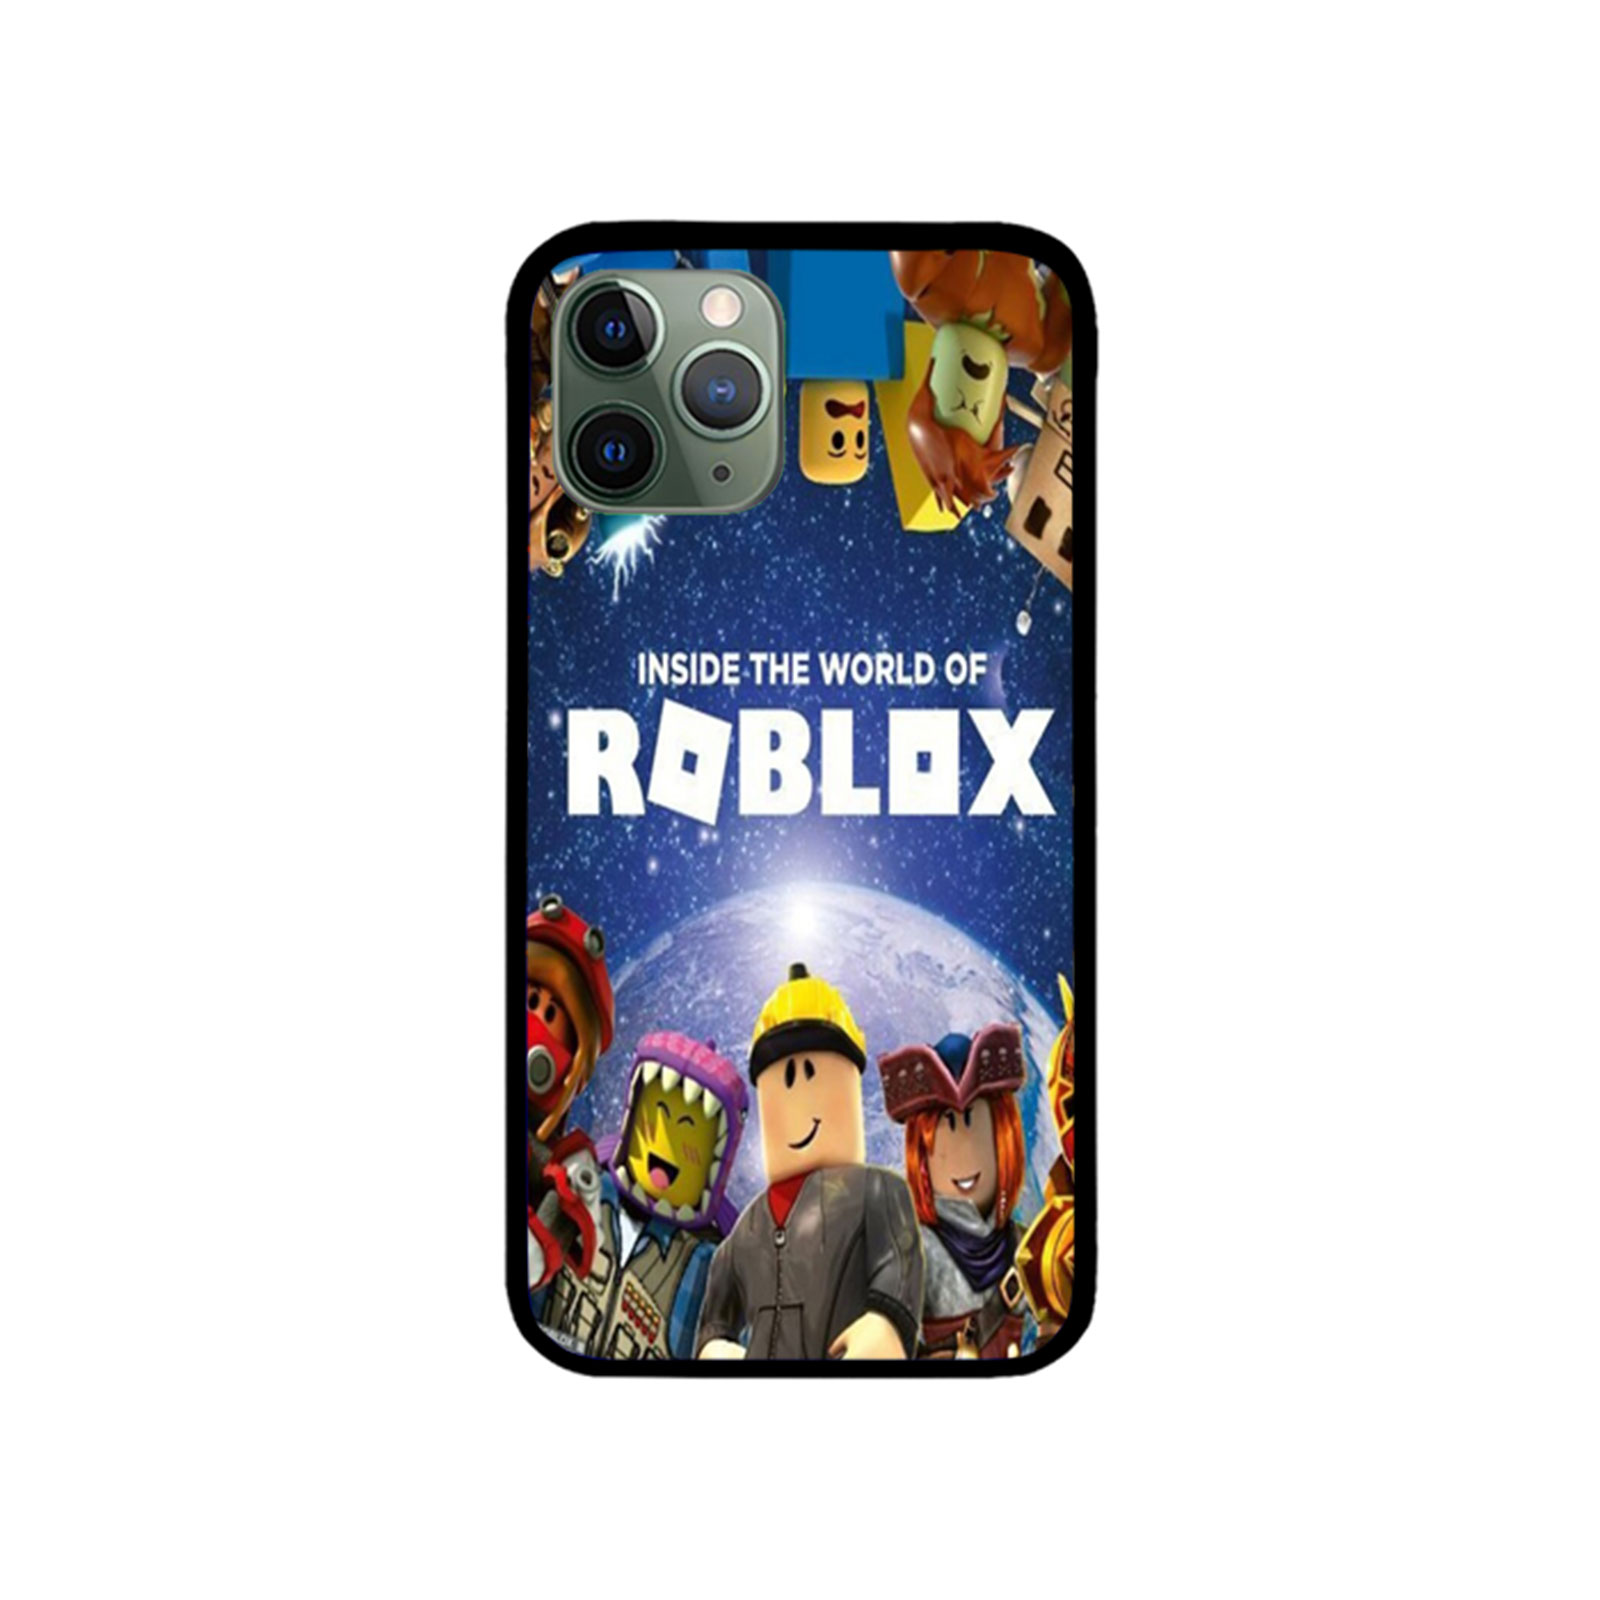 Inside the world of Roblox iPhone Case 11,X,XS,XR,8,7,6 and More